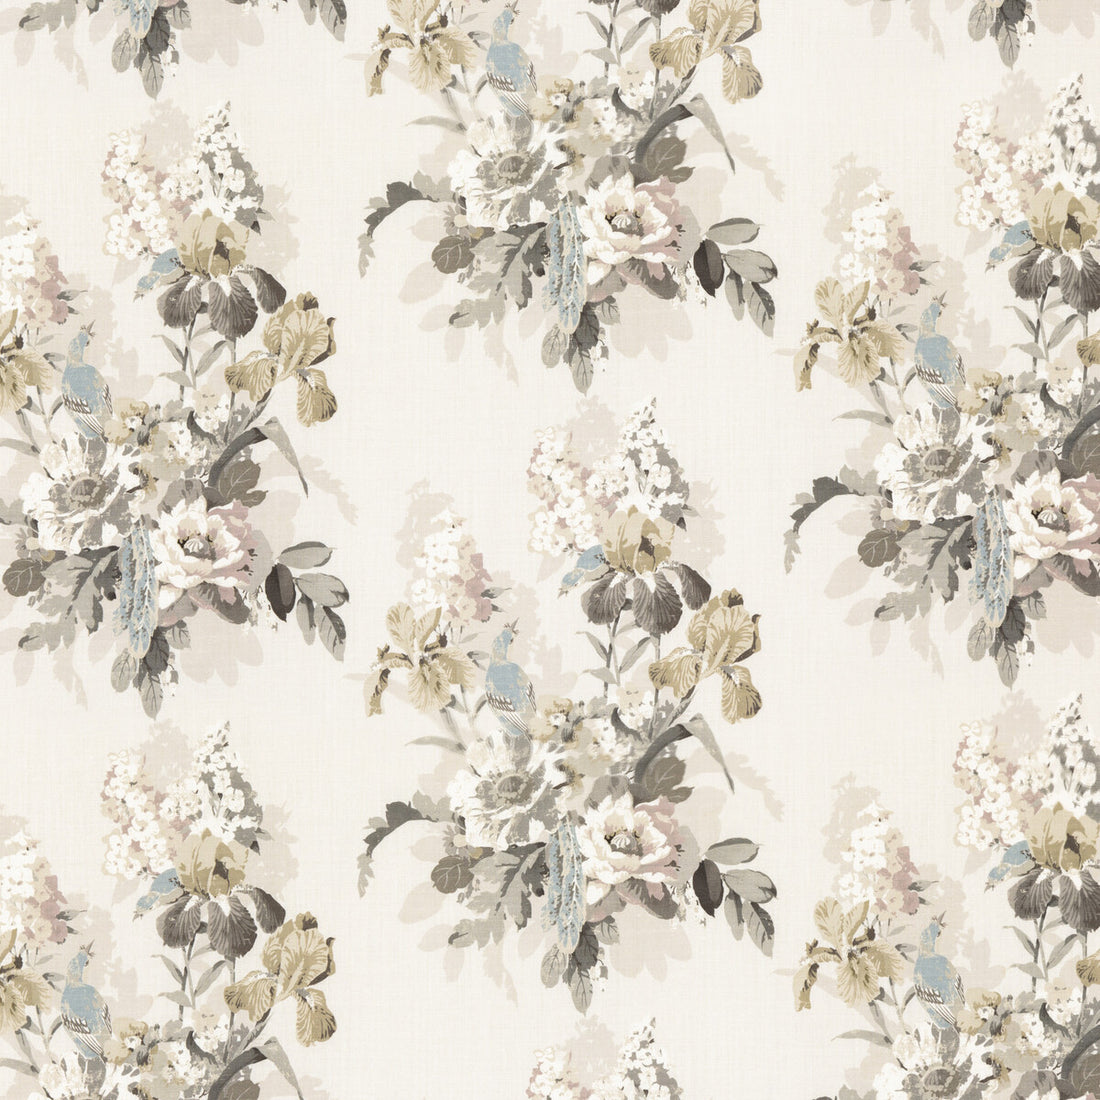 Bird &amp; Iris fabric in ivory/mole color - pattern BP10774.3.0 - by G P &amp; J Baker in the Signature Prints collection